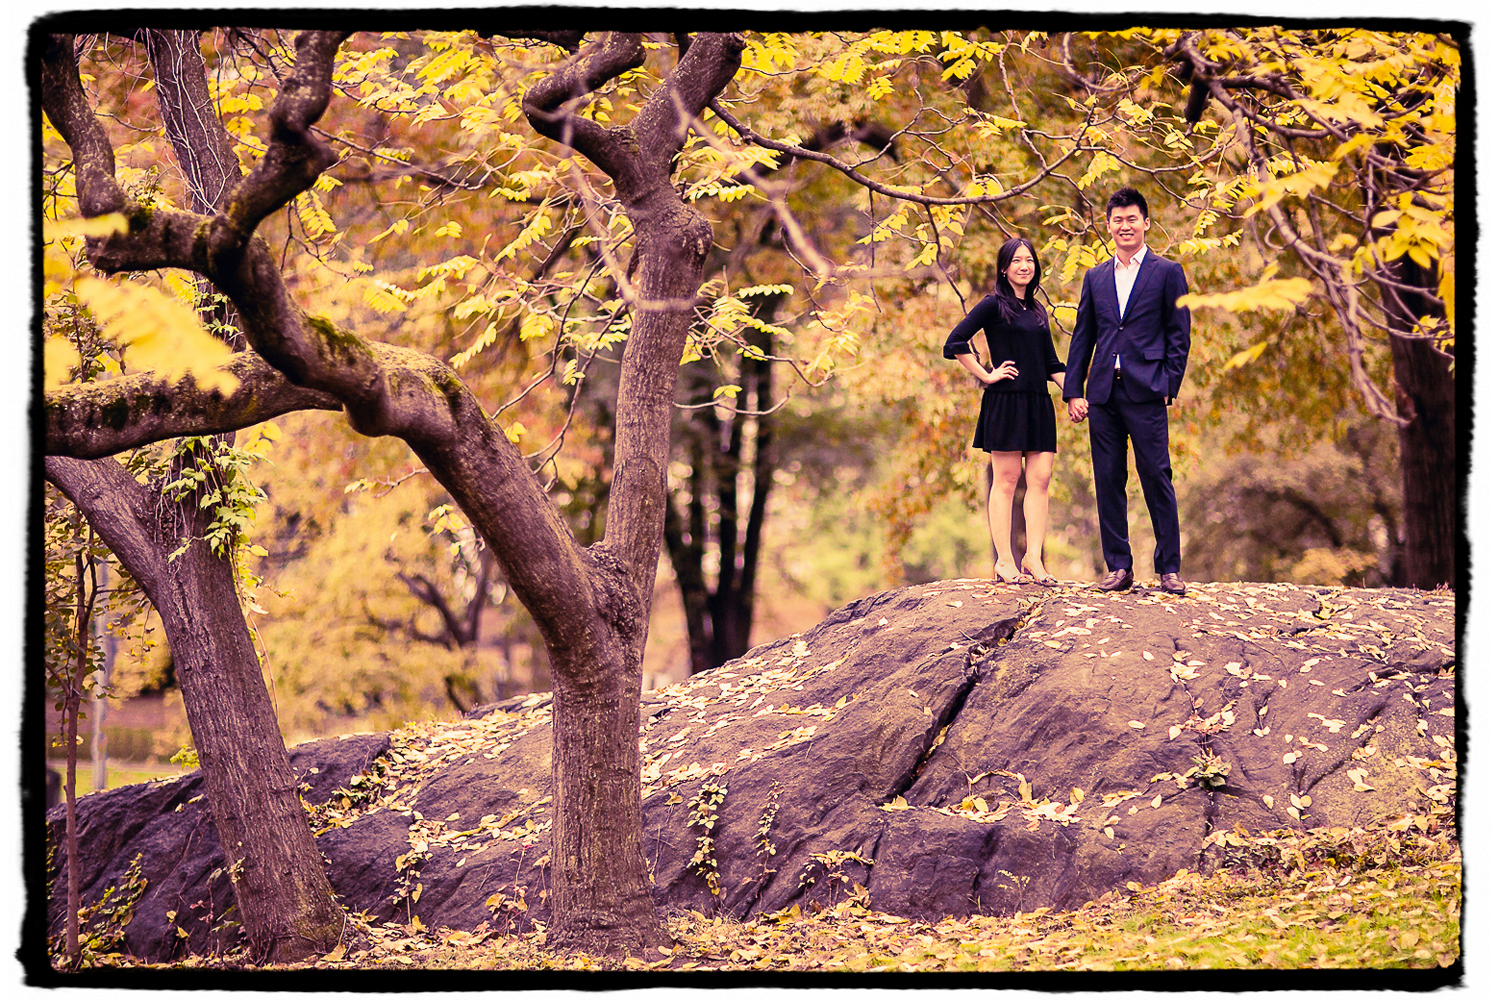 Engagement Portraits: a couple from Singapore traveled to New York City for a destination Engagement shoot in Central Park.